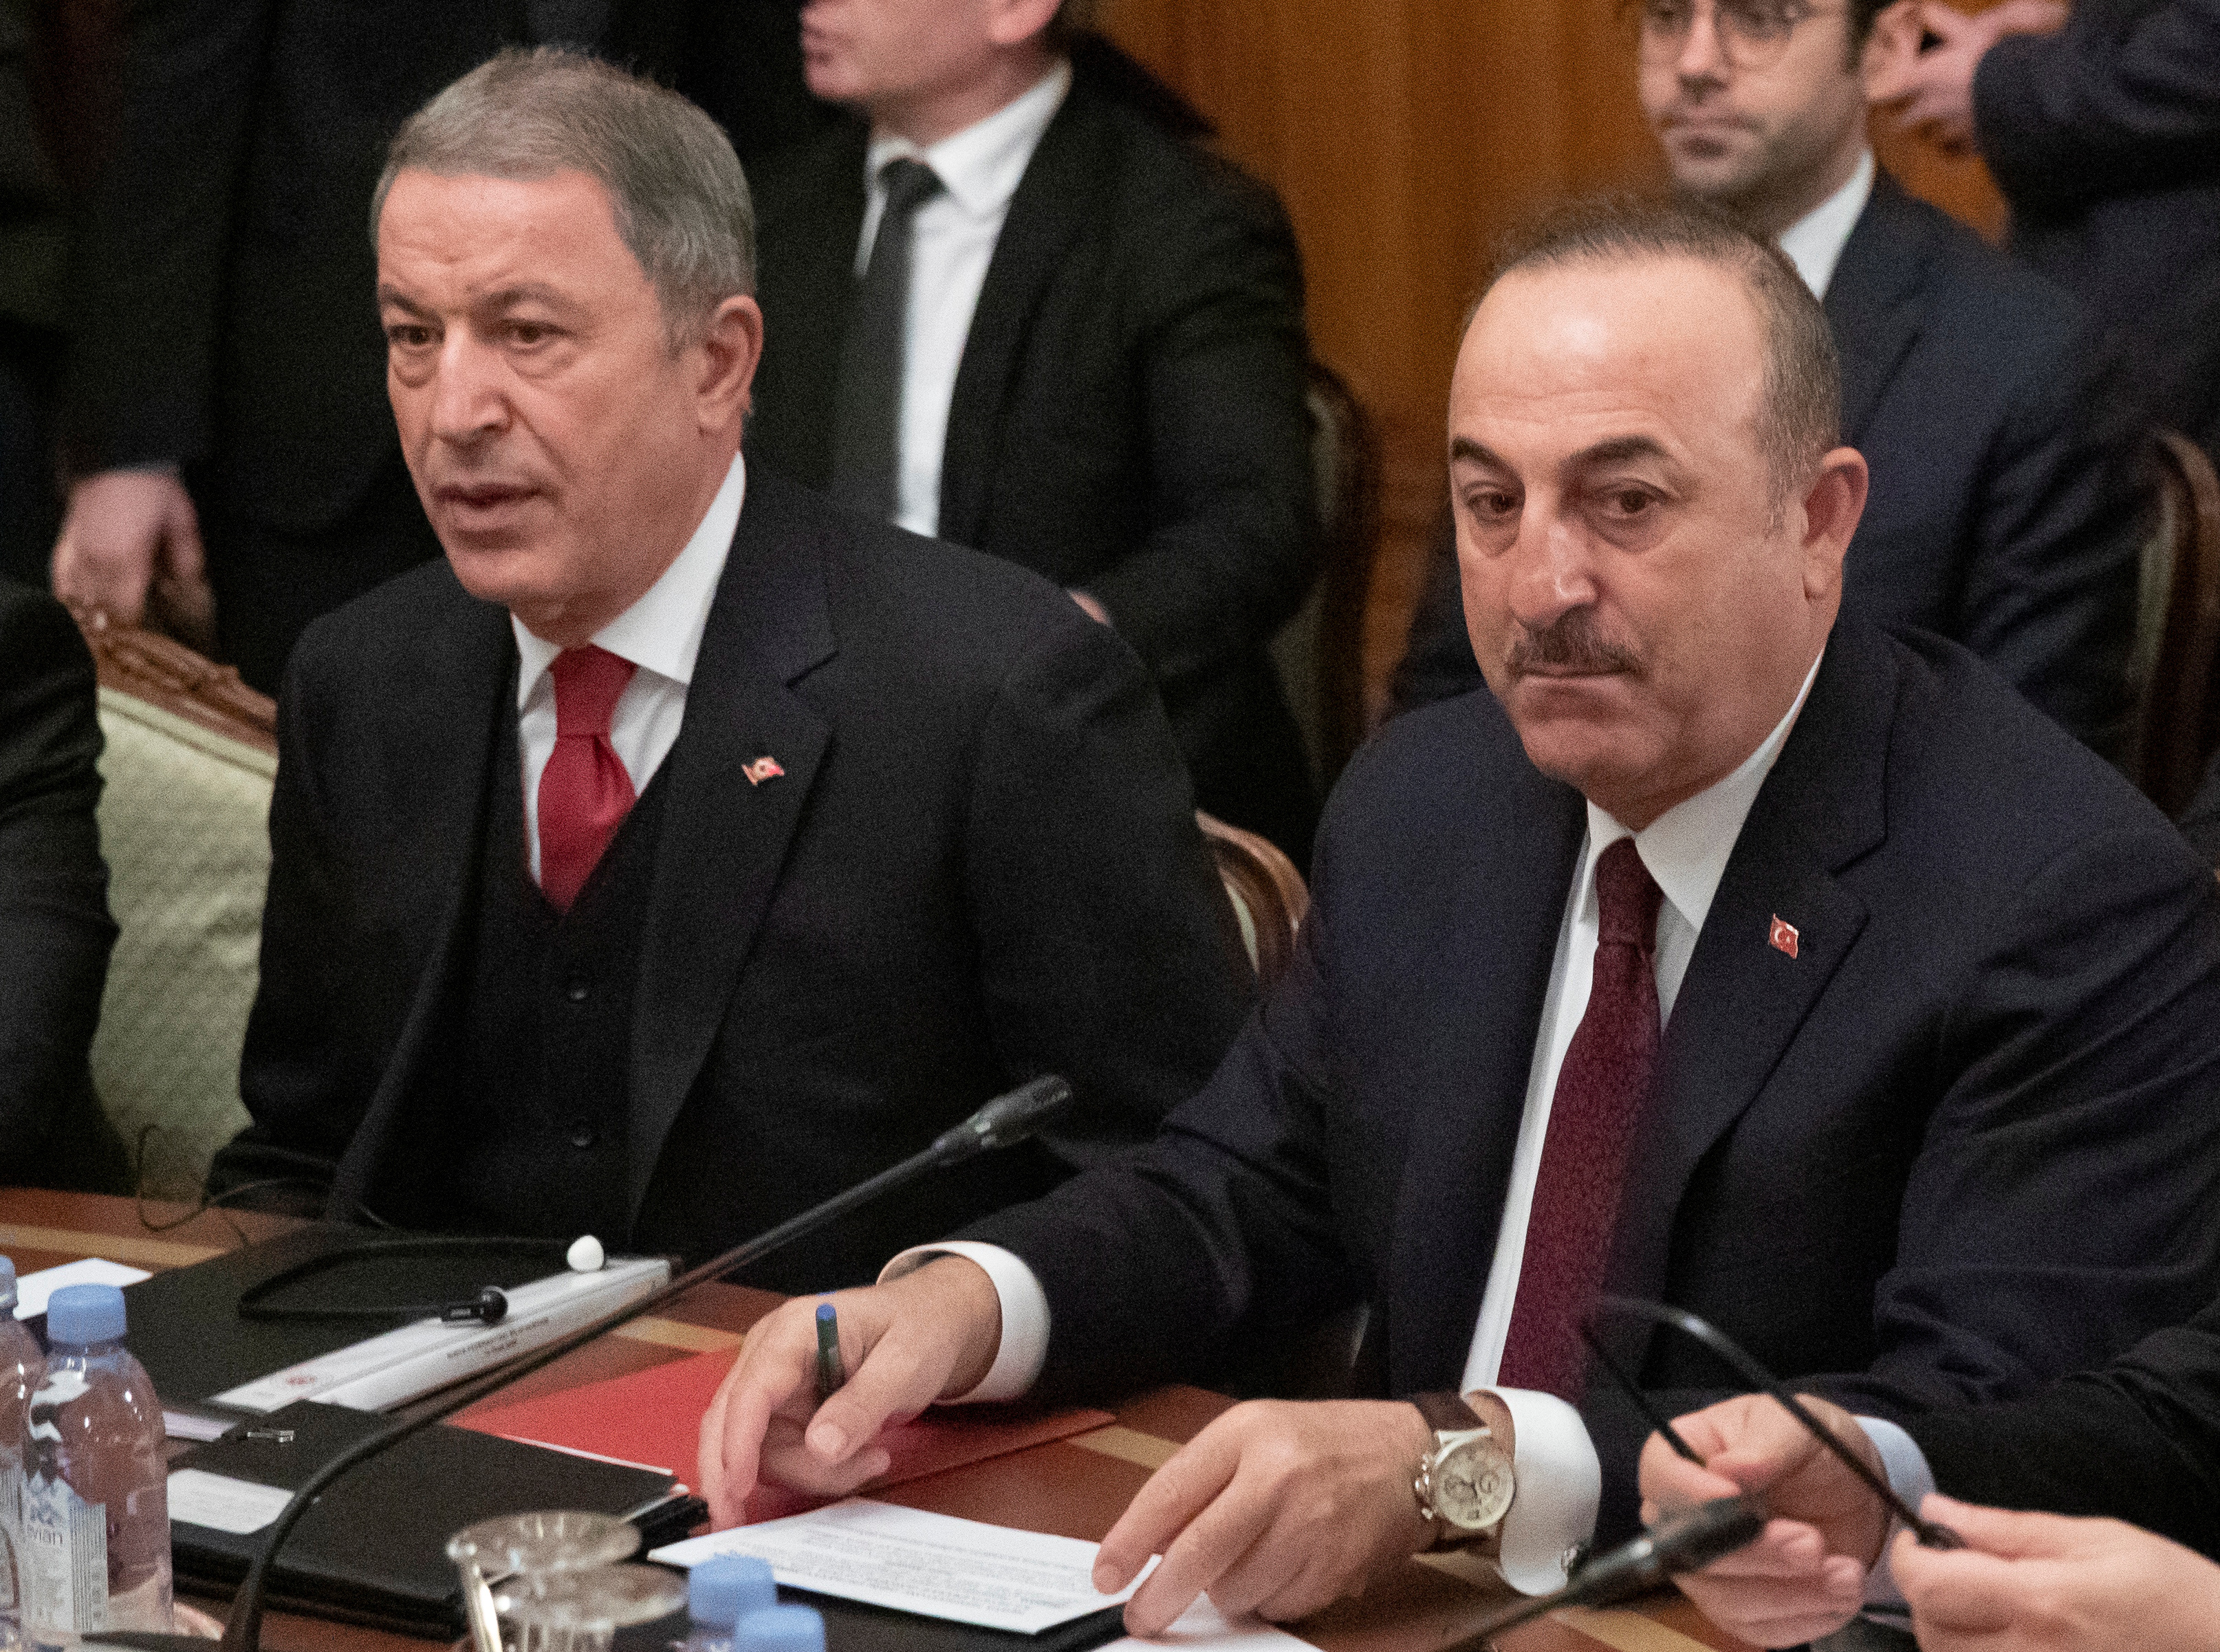 Turkish Foreign Minister Mevlut Cavusoglu and Defence Minister Hulusi Akar attend a meeting with Russian Foreign Minister Sergei Lavrov and Defence Minister Sergei Shoigu in Moscow